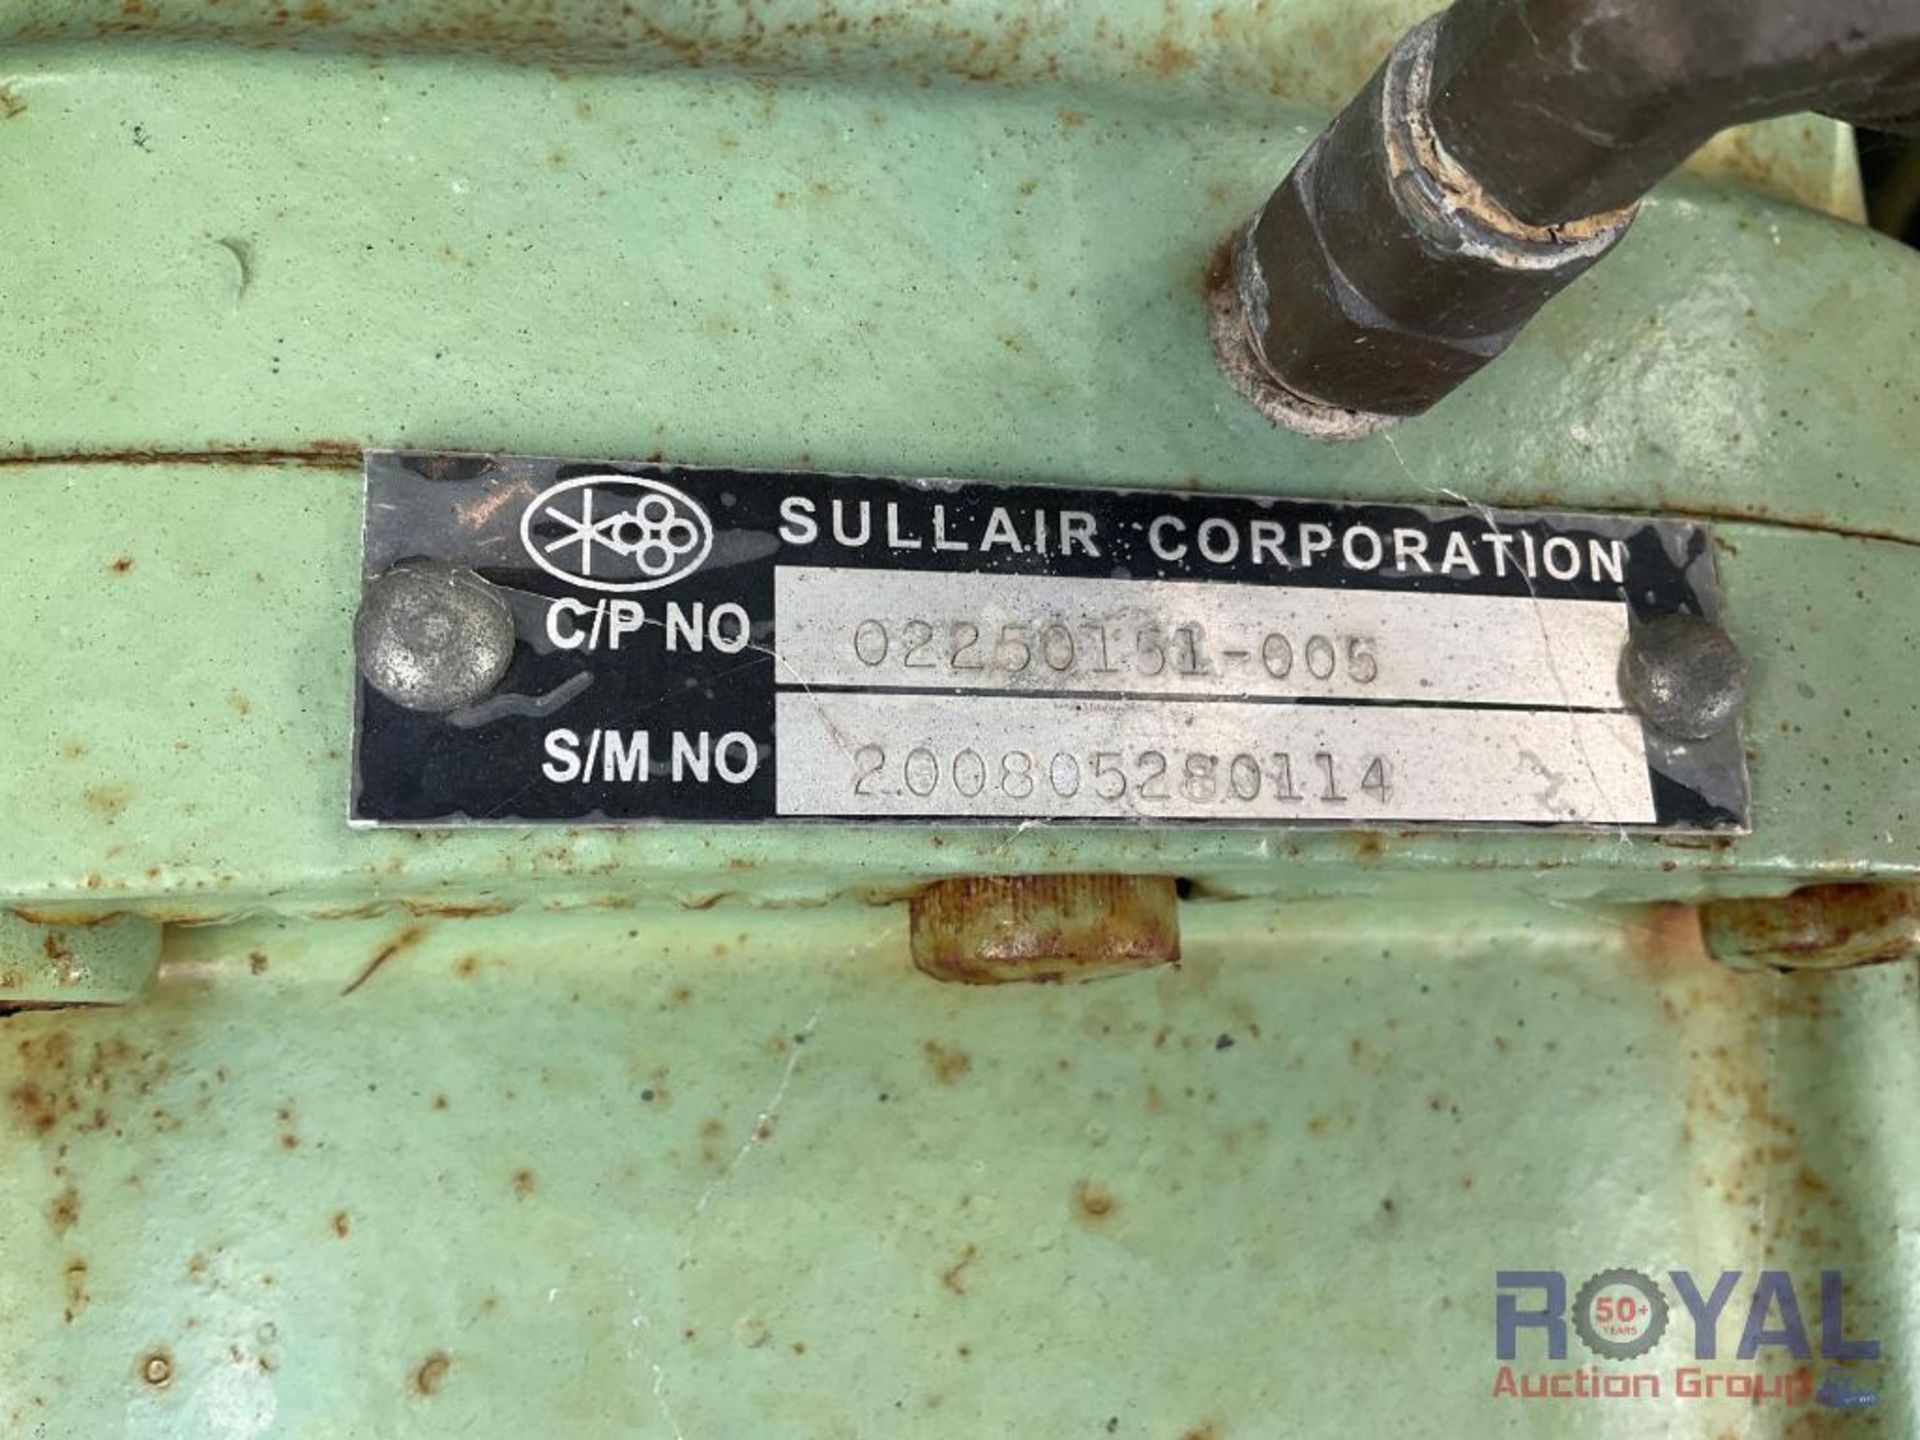 Sullair 130 S/A Towable Air Compressor - Image 13 of 15